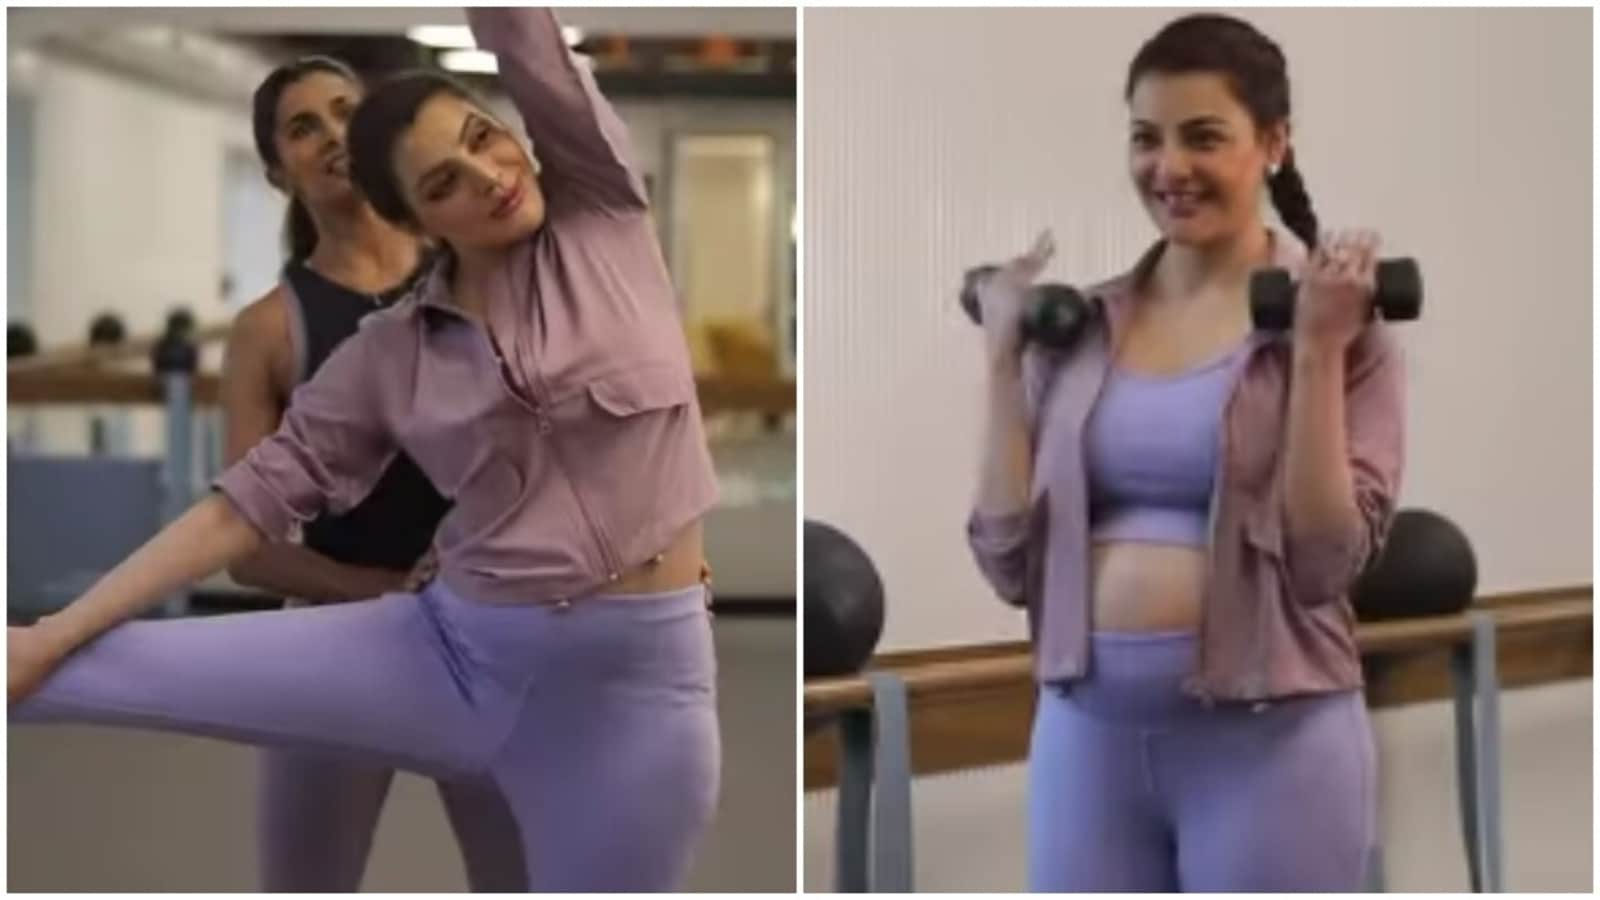 Mom-to-be Kajal Aggarwal does Pilates and barre exercise in new workout  video | Health - Hindustan Times